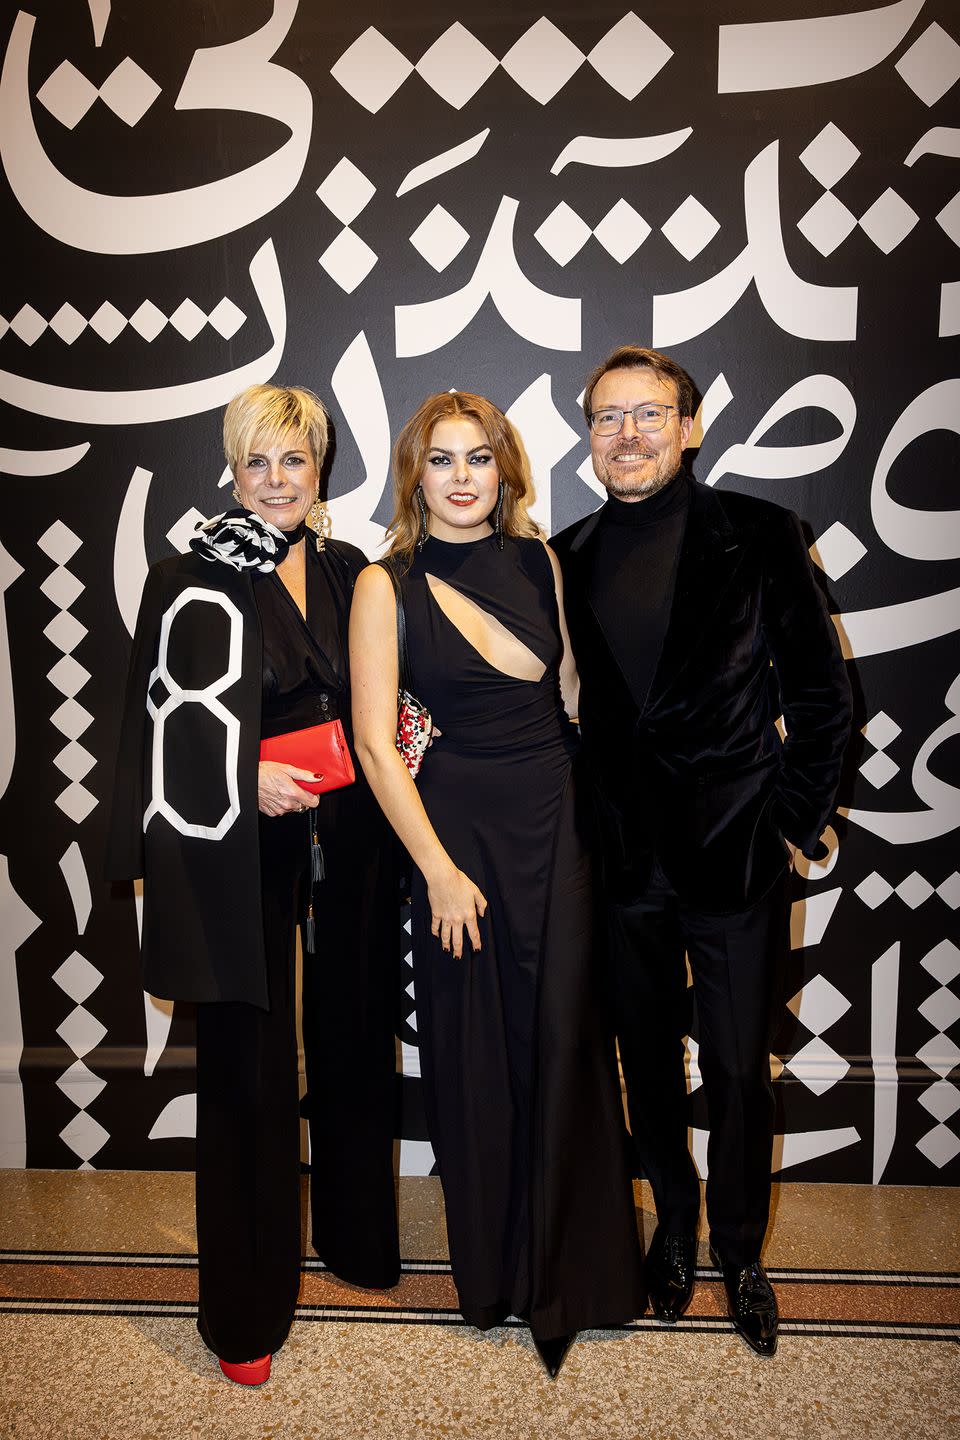 amsterdam, netherlands november 15 princess laurentien of the netherlands, countess eloise of orange nassau and prince constantijn of the netherlands attend the harper's bazaar women of the year awards at the stedelijk museum on november 15, 2023 in amsterdam, netherlands princess laurentien and eloise van oranje are the winners of the public award handed over by prince constantijn photo by patrick van katwijkgetty images